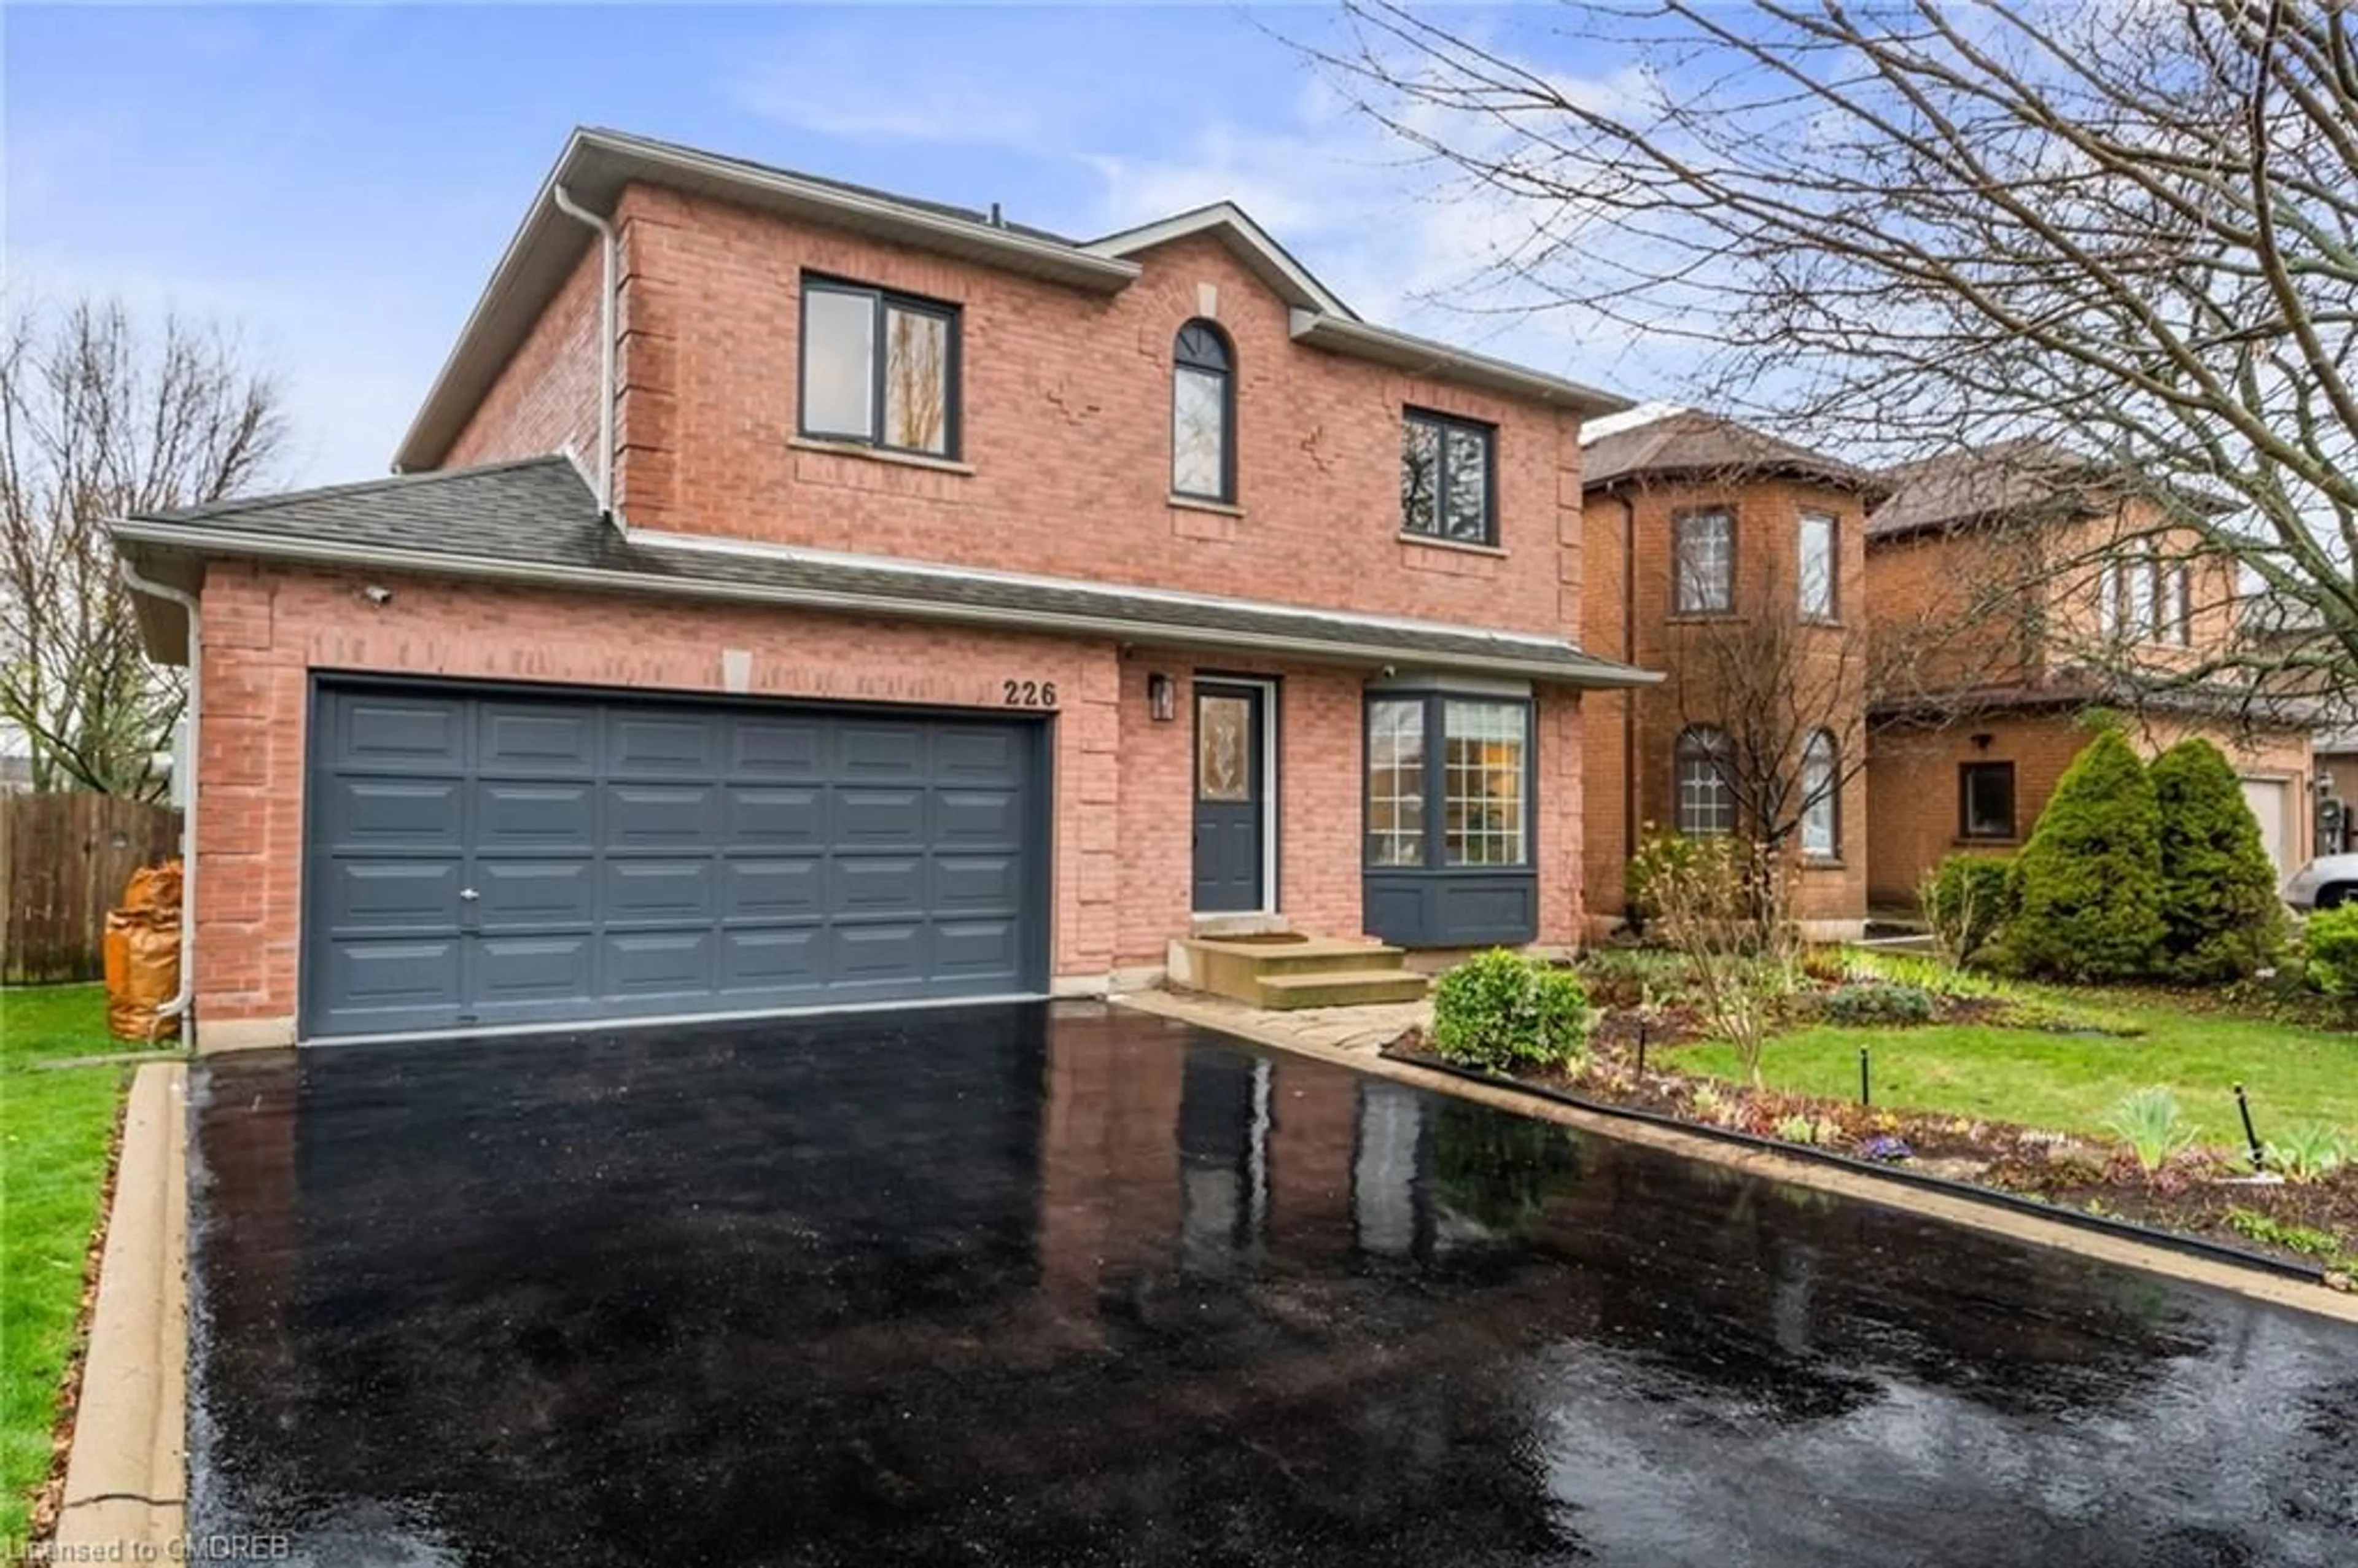 Home with brick exterior material for 226 Howell Rd, Oakville Ontario L6H 5Y7